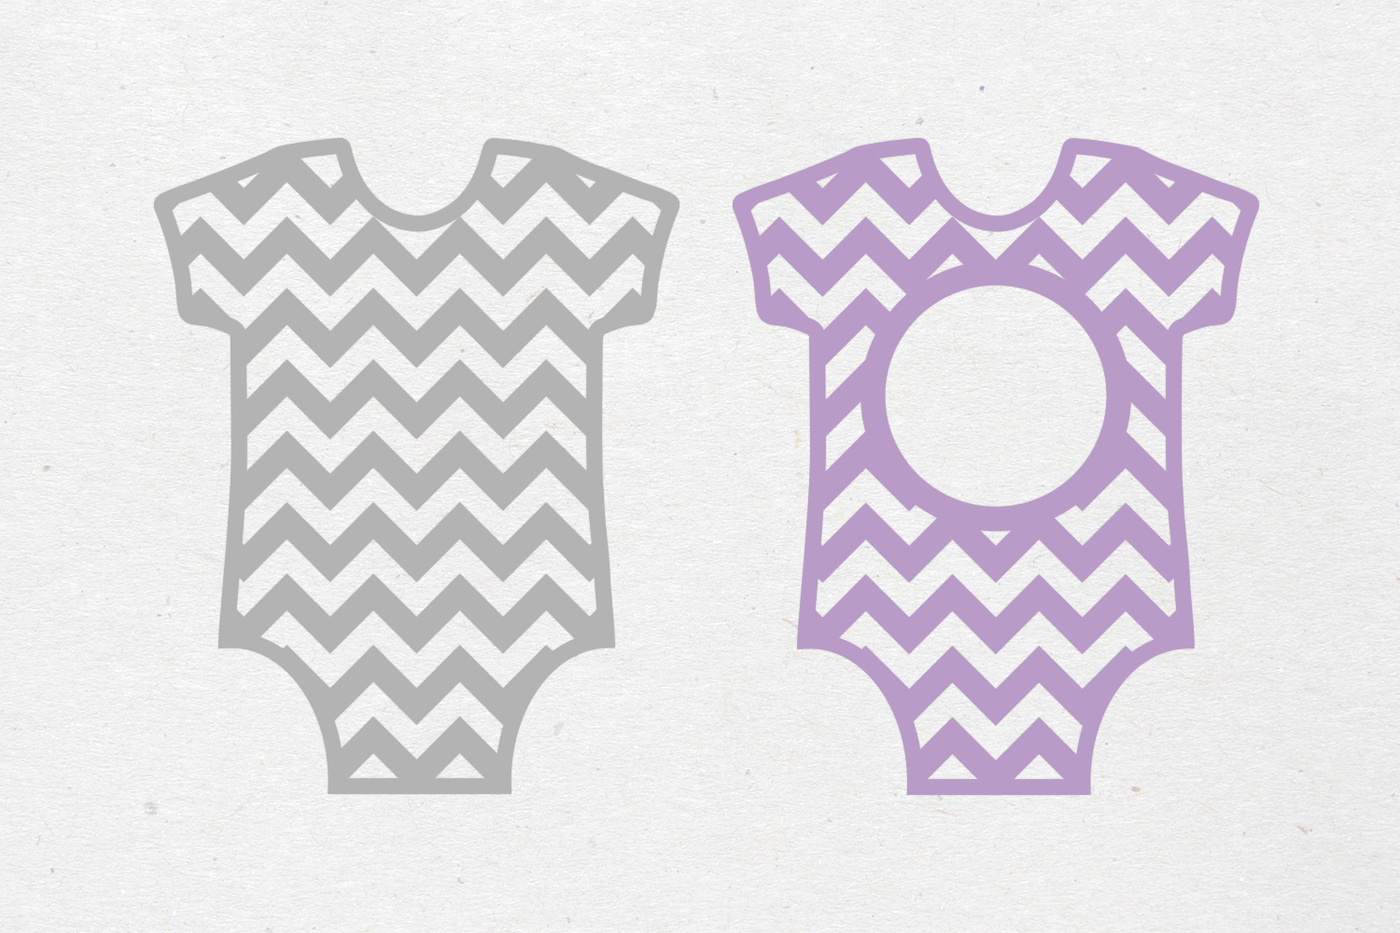 Two bodysuit designs, each with a chevron pattern. The left is grey, the right is lavender with a circle in the middle for adding a monogram.